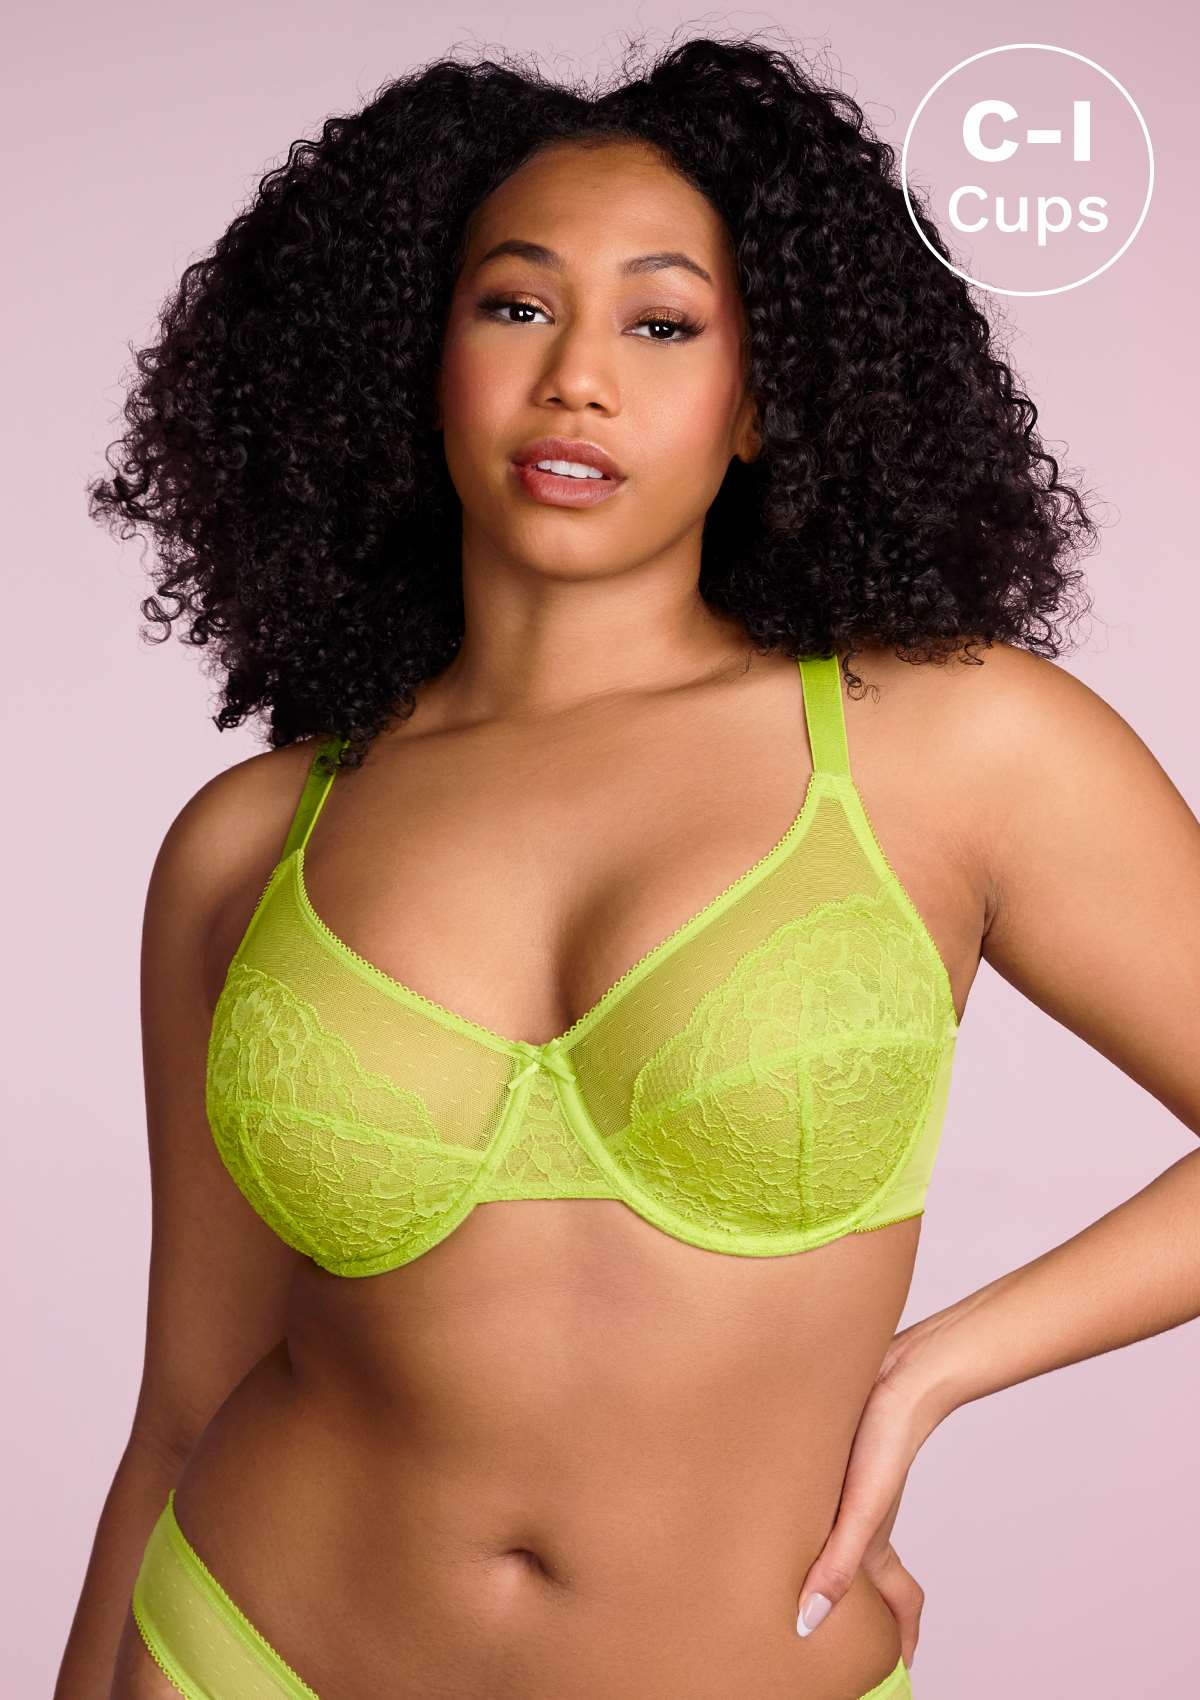 HSIA Enchante Full Cup Minimizing Bra: Supportive Unlined Lace Bra - Lime Green / 38 / H